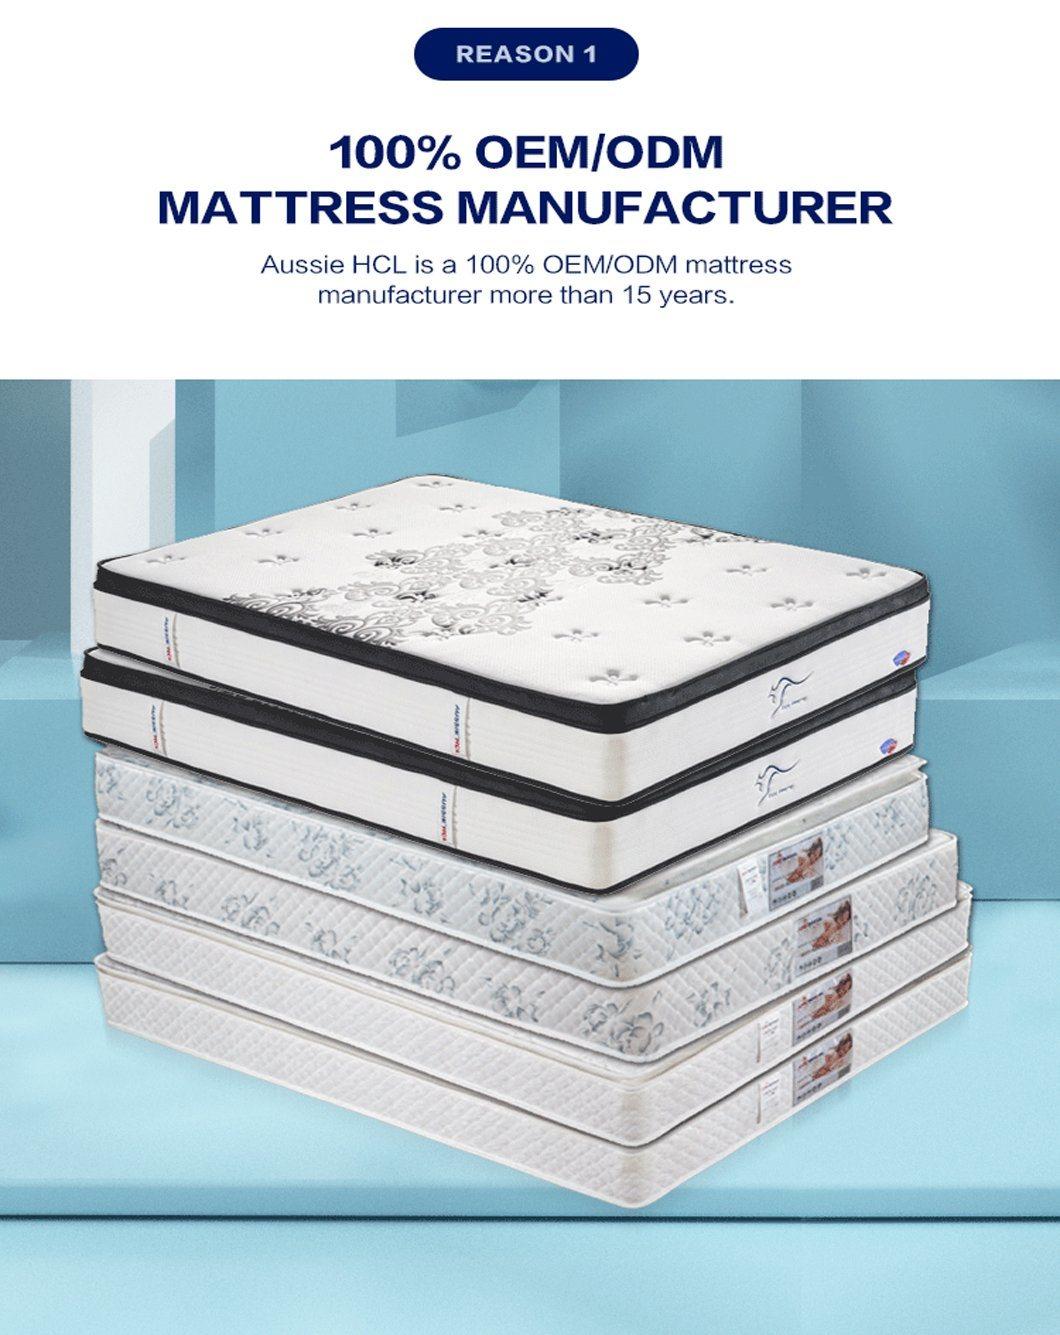 Bedroom Furniture Roll Sleep Well Hotel Full Inch Tatami Mattress Manufacture Twin Queen King Double Futon Mattresses Topper